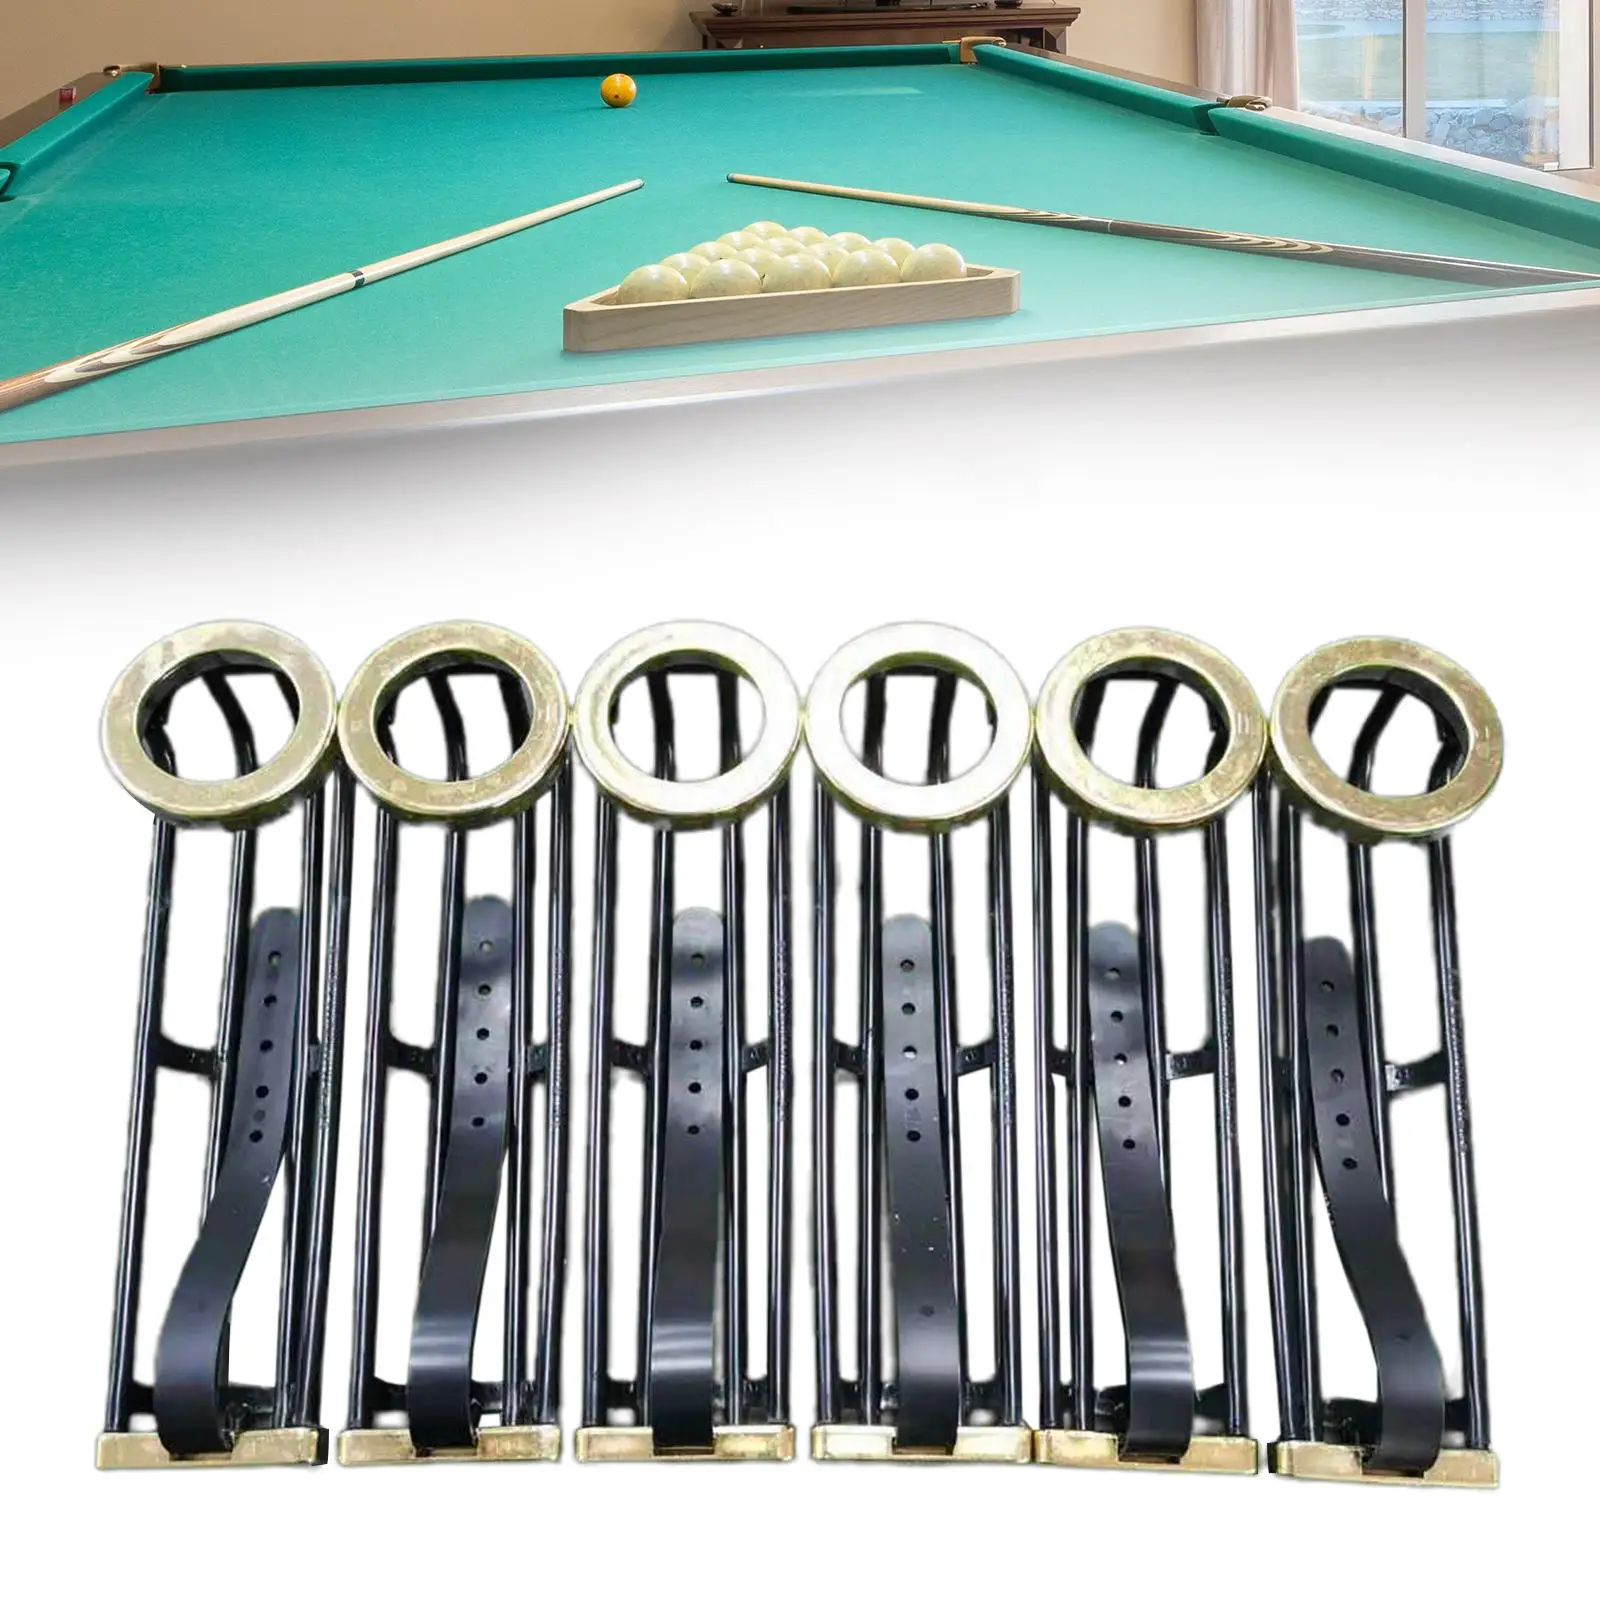 6x Billiards Table Pocket Rail Parts Entertainment American Pool Table Accessories Lightweight Durable Portable Snooker Pockets